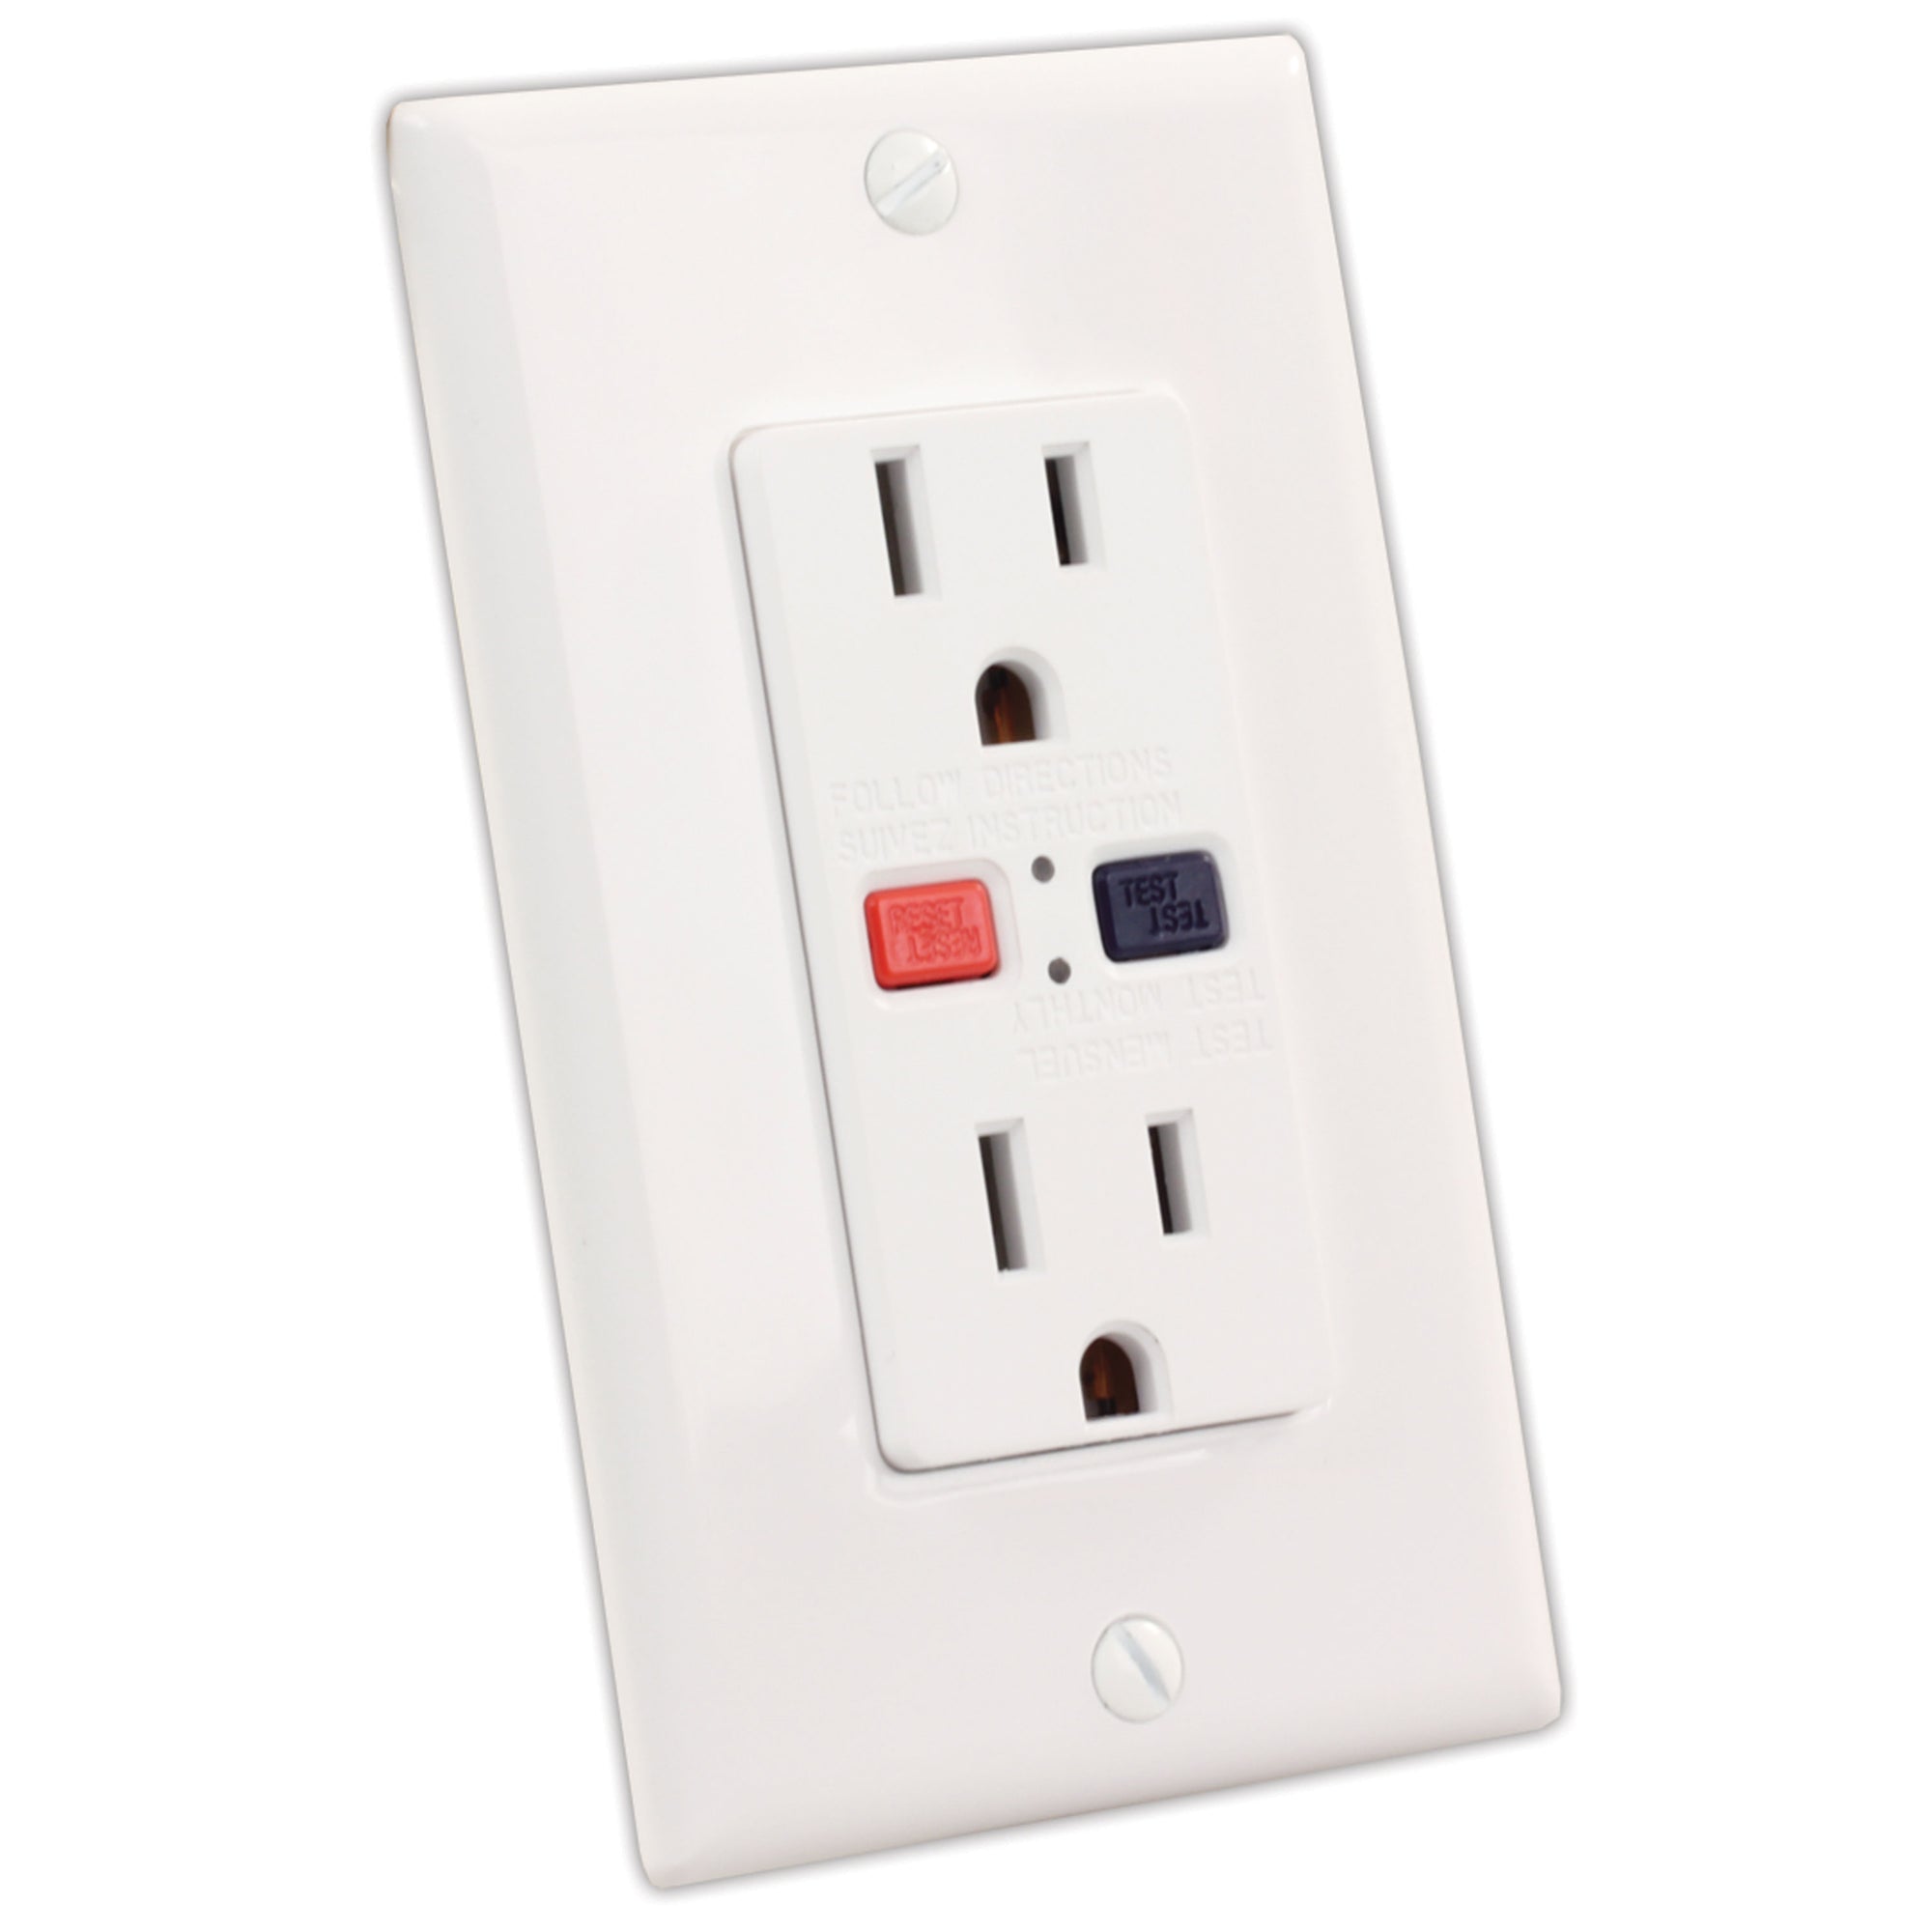 JR Products 15005 120V 15A GFCI Electrical Outlet